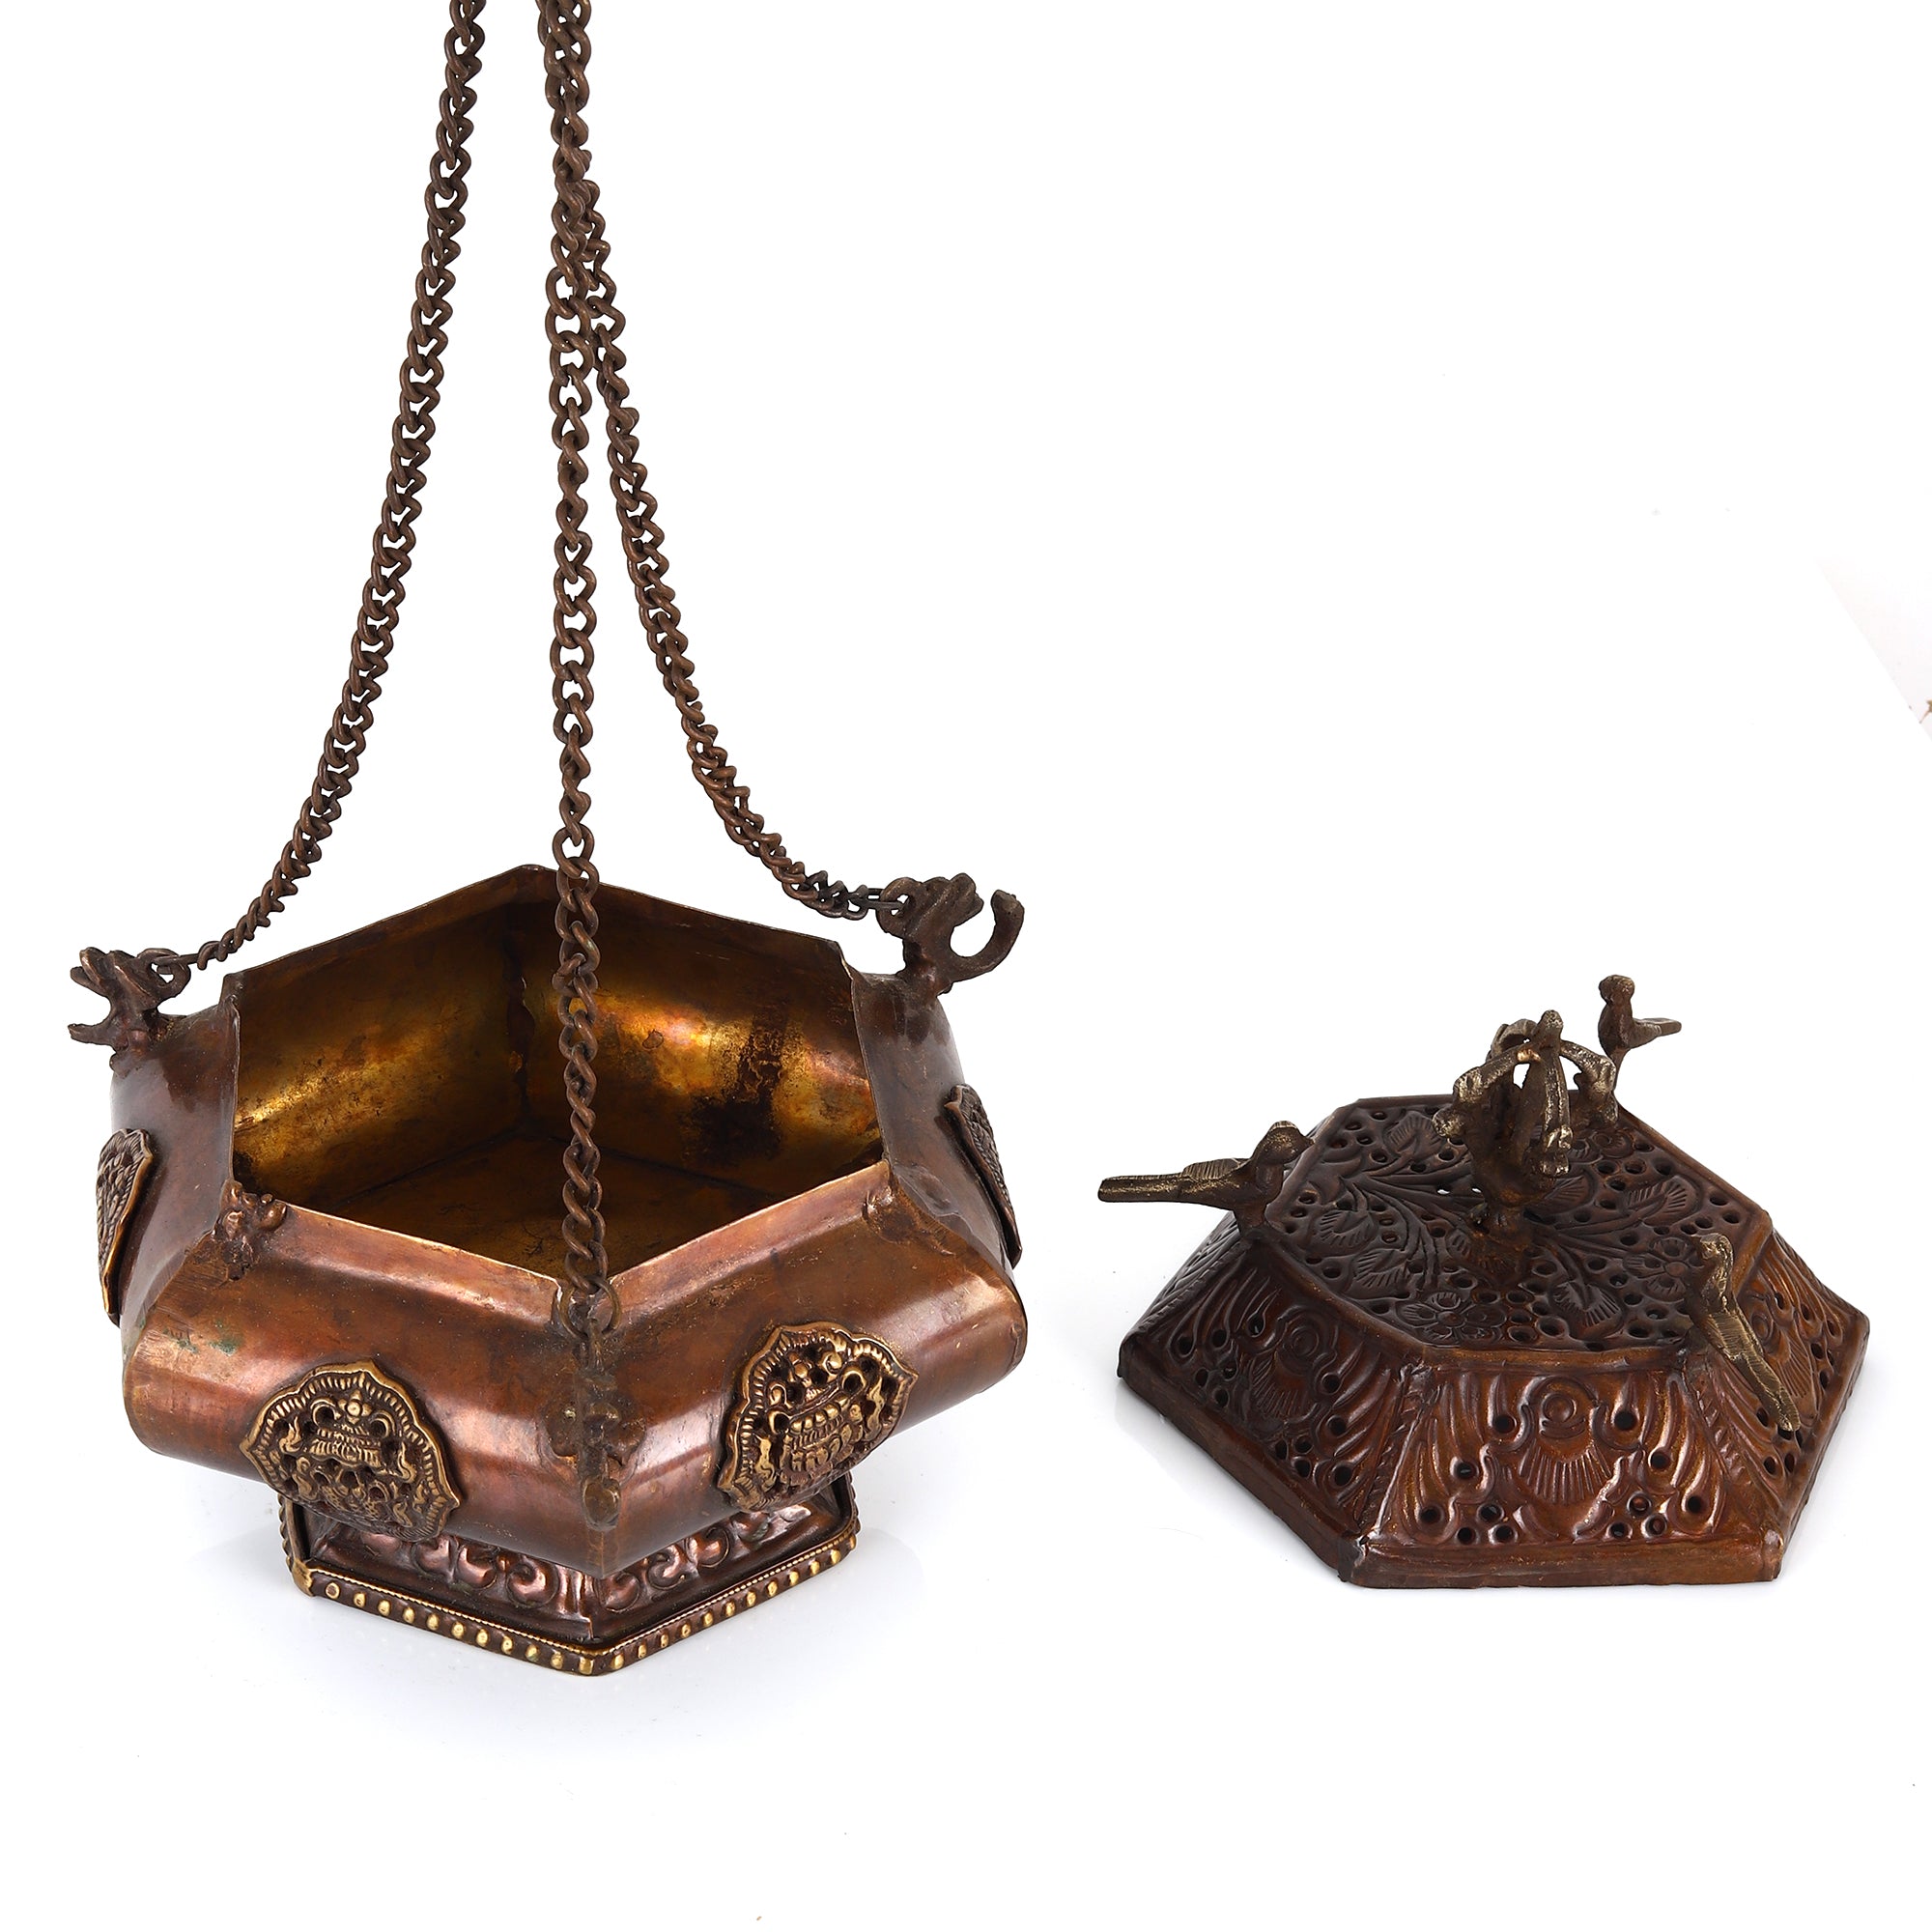 Dhoop Dani, Incense Burner with Wall Hanger – To Get a Serene Aromatic Experience